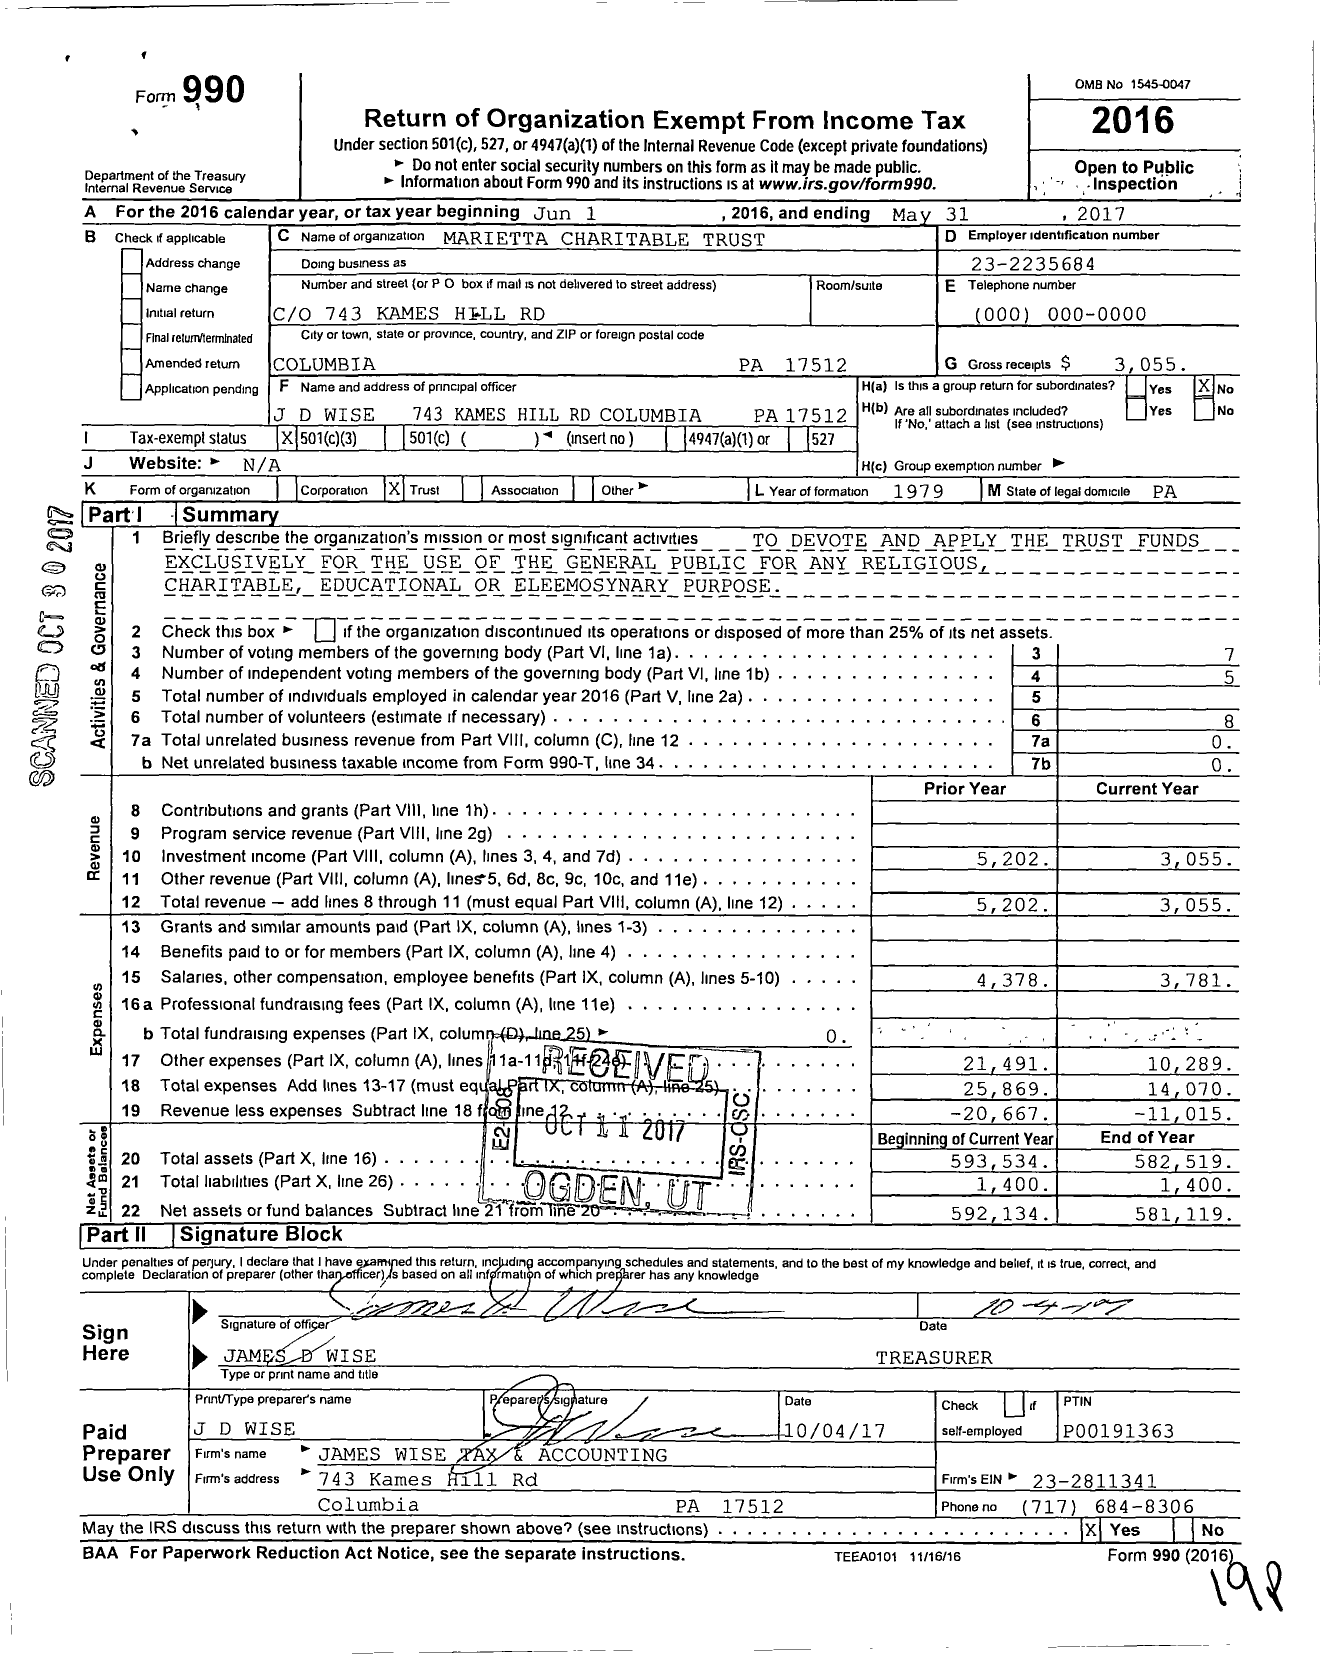 Image of first page of 2016 Form 990 for Marietta Charitable Trust